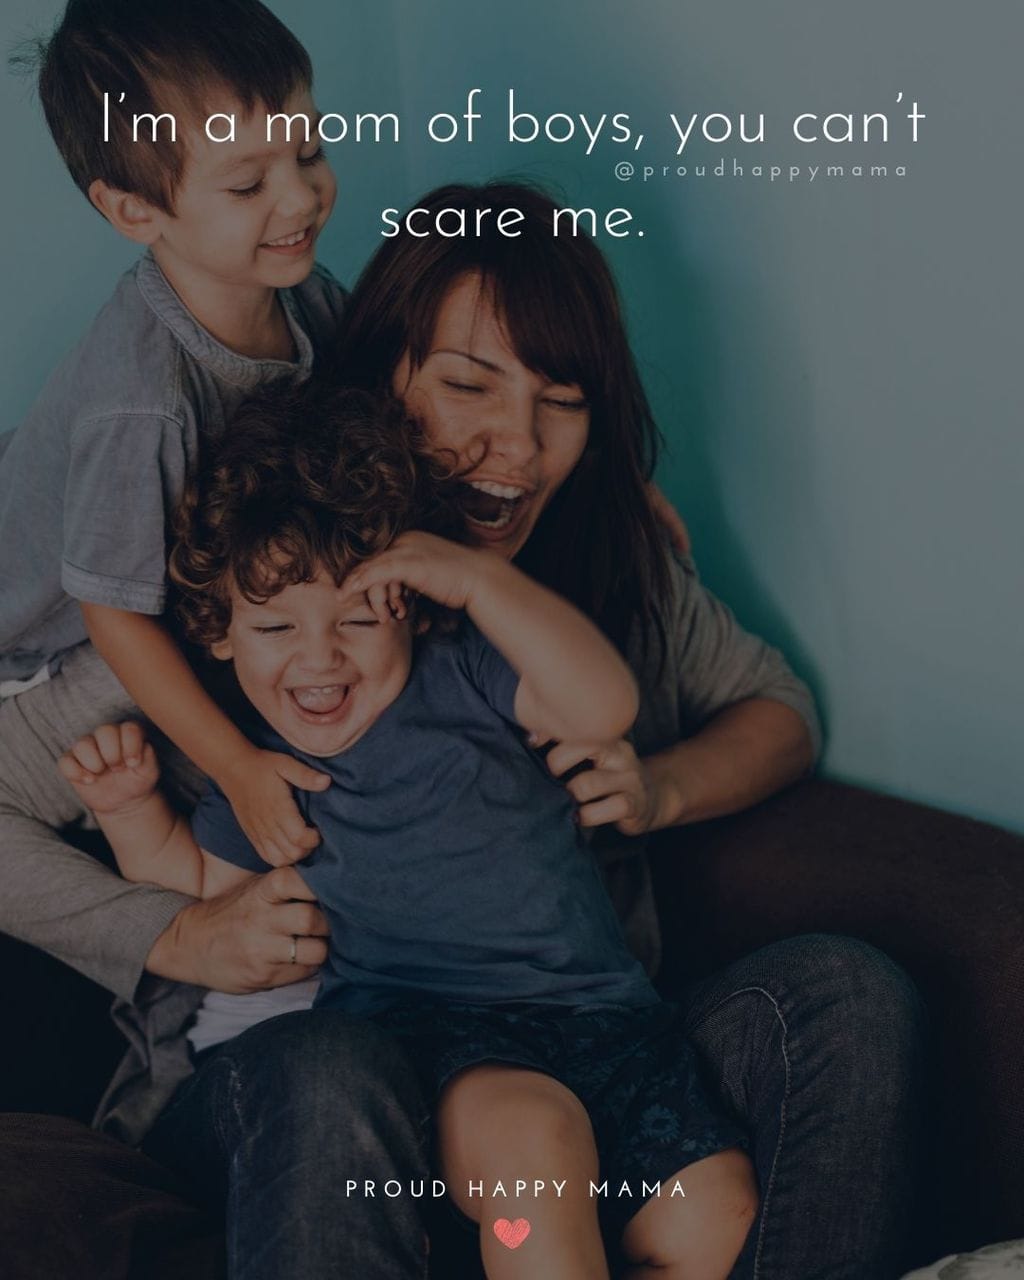 Boy Mom Quotes - I’m a mom of boys, you can’t scare me.